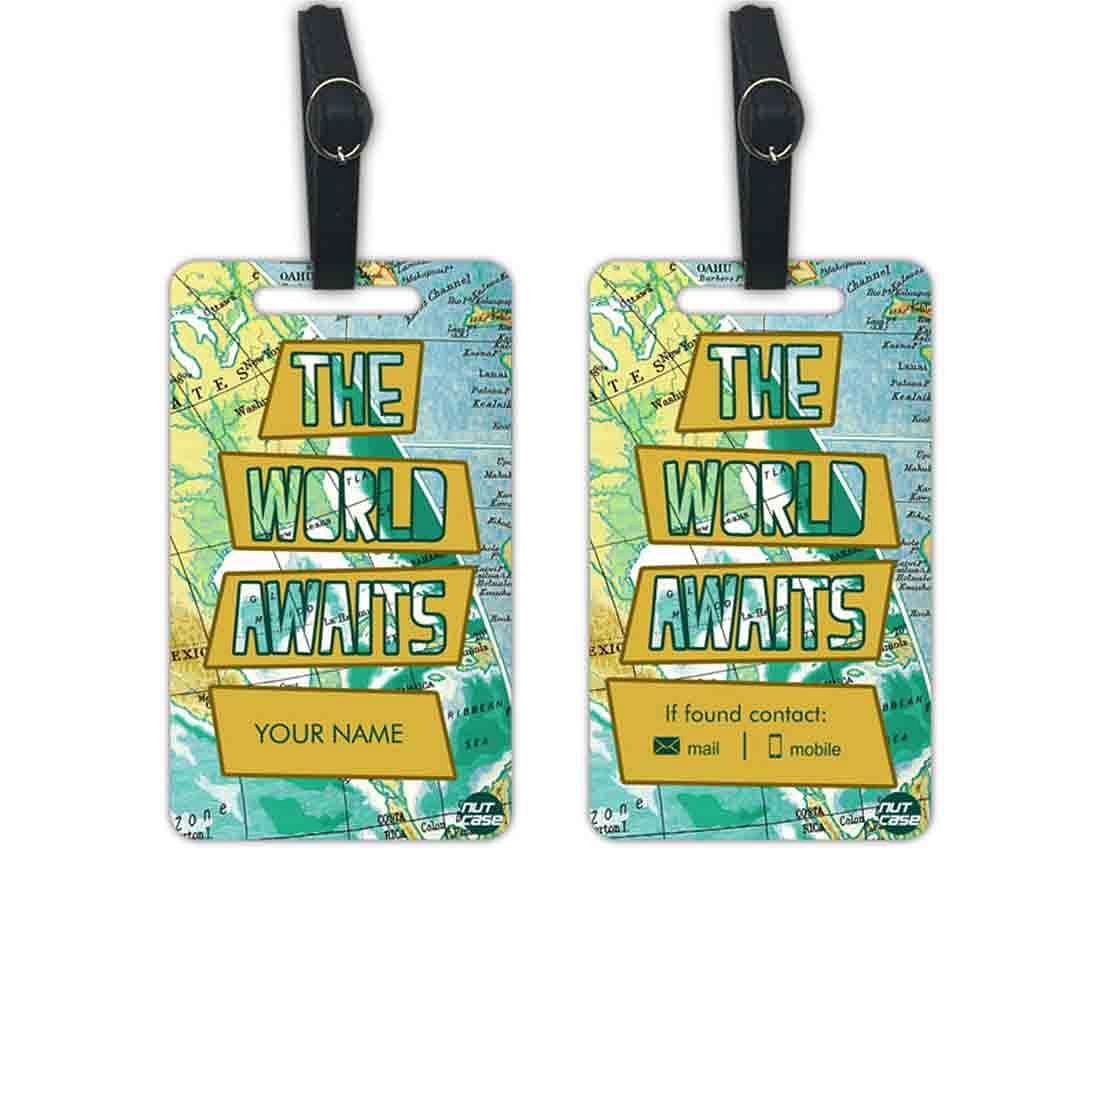 Customized Travel Leather Luggage Tags - Add your Name - Set of 2 Nutcase